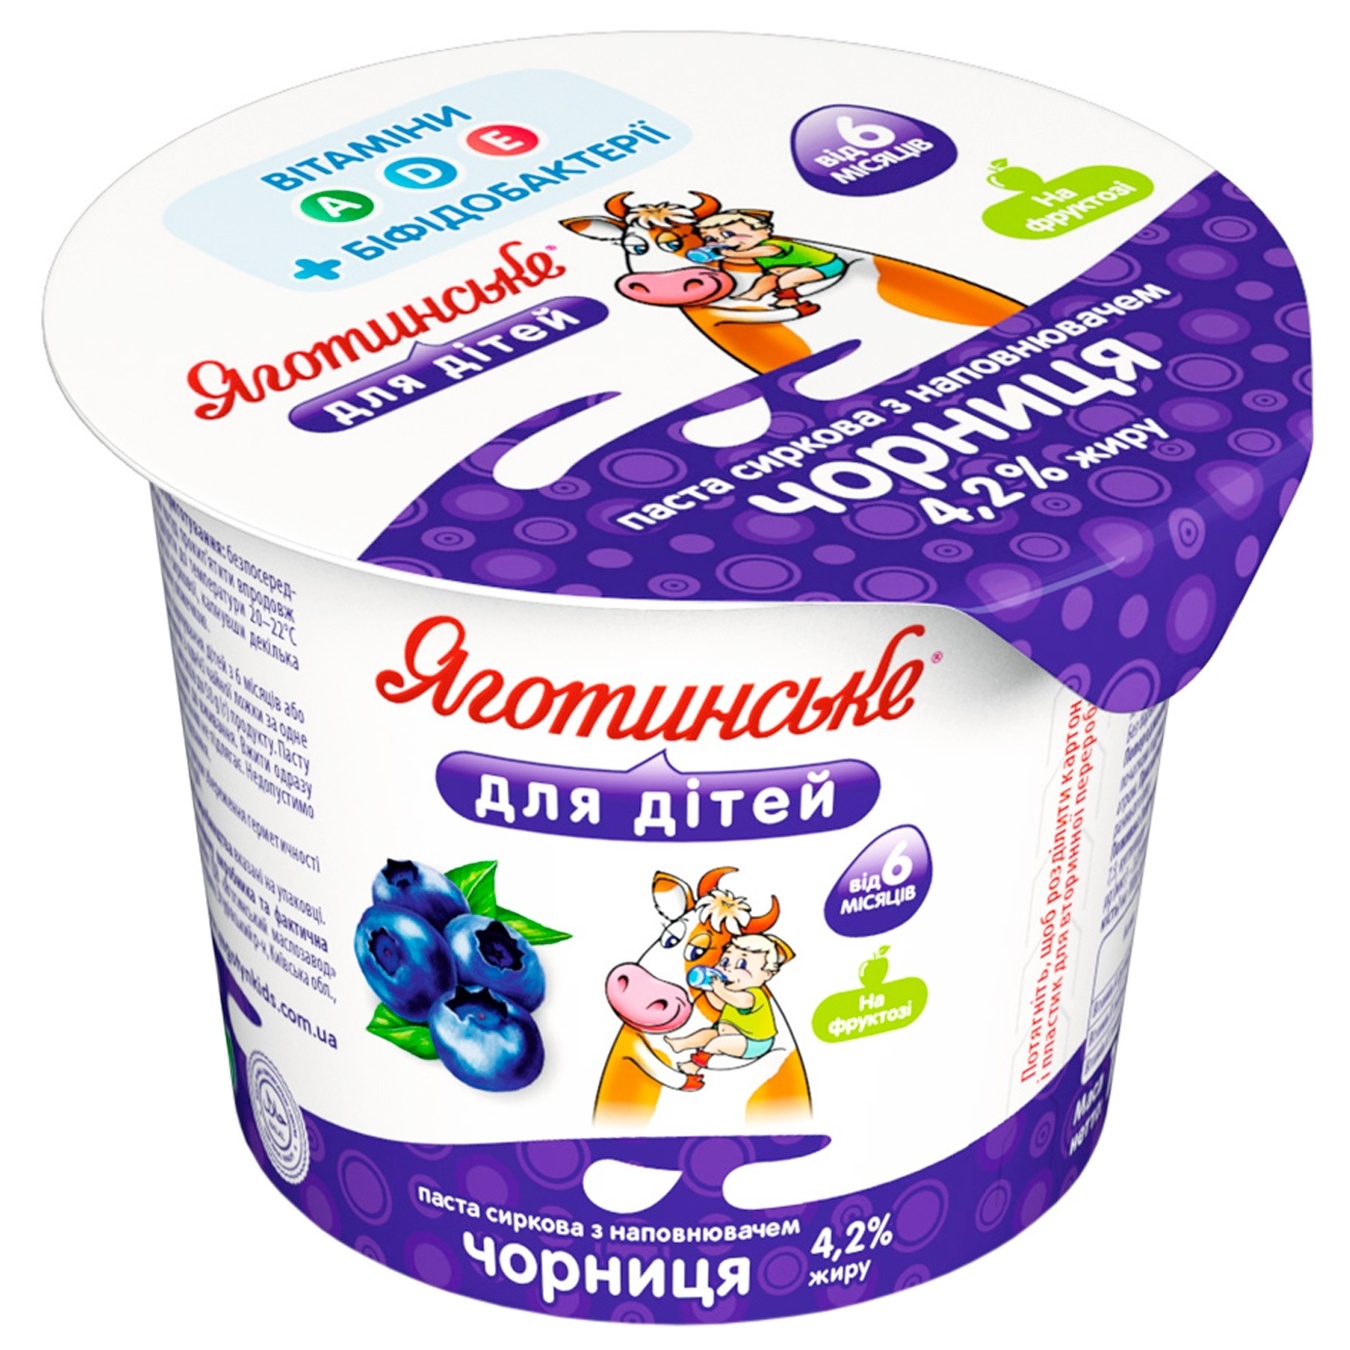 Yahotynske Blueberry Flavored Cottage Cheese for Babies from 6 Months 4,2% 100g